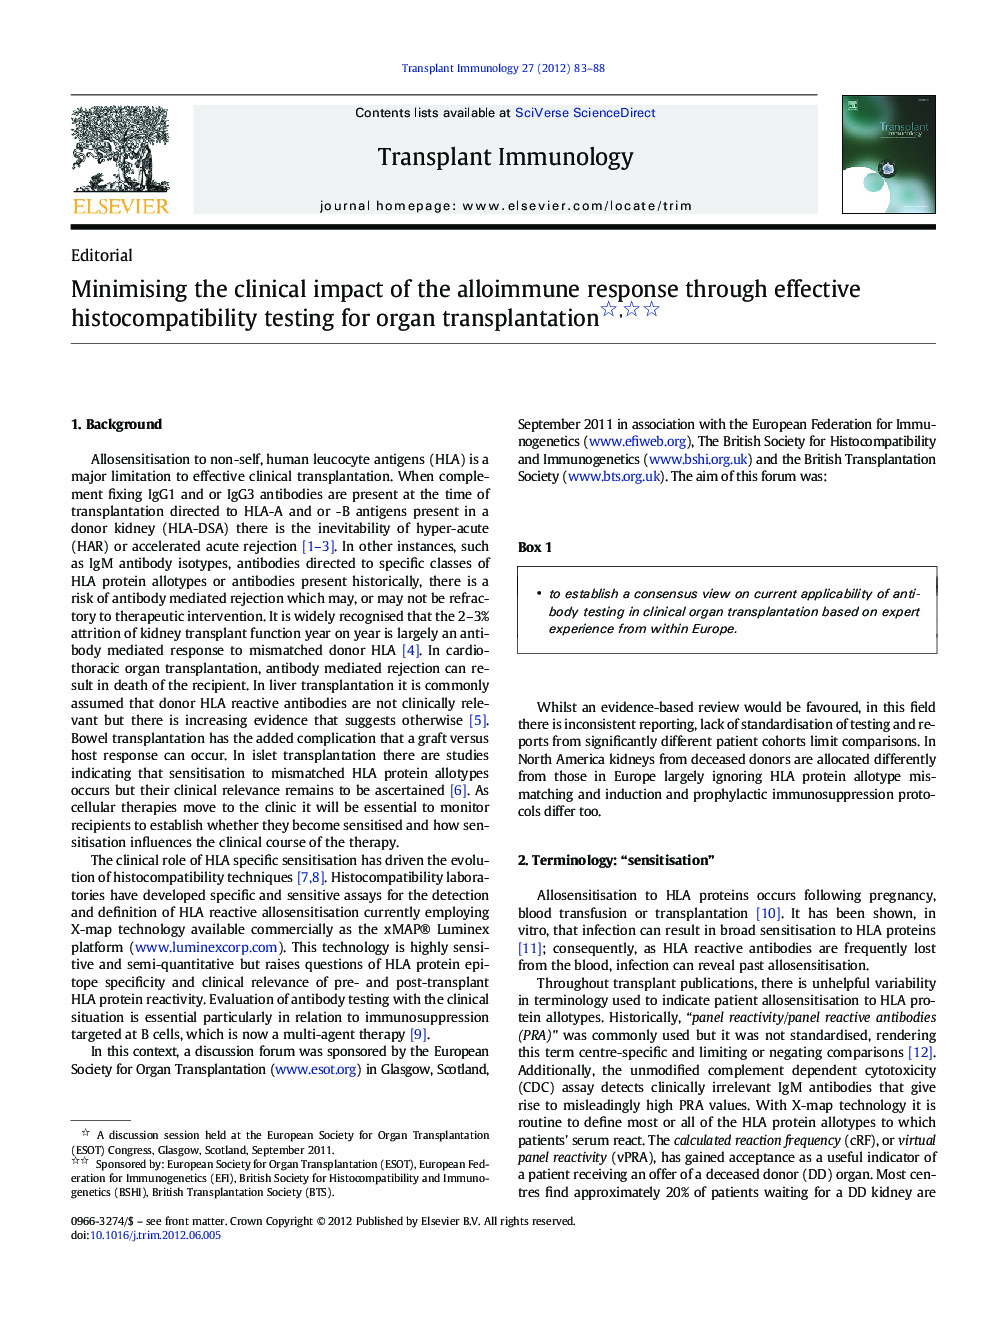 Minimising the clinical impact of the alloimmune response through effective histocompatibility testing for organ transplantation